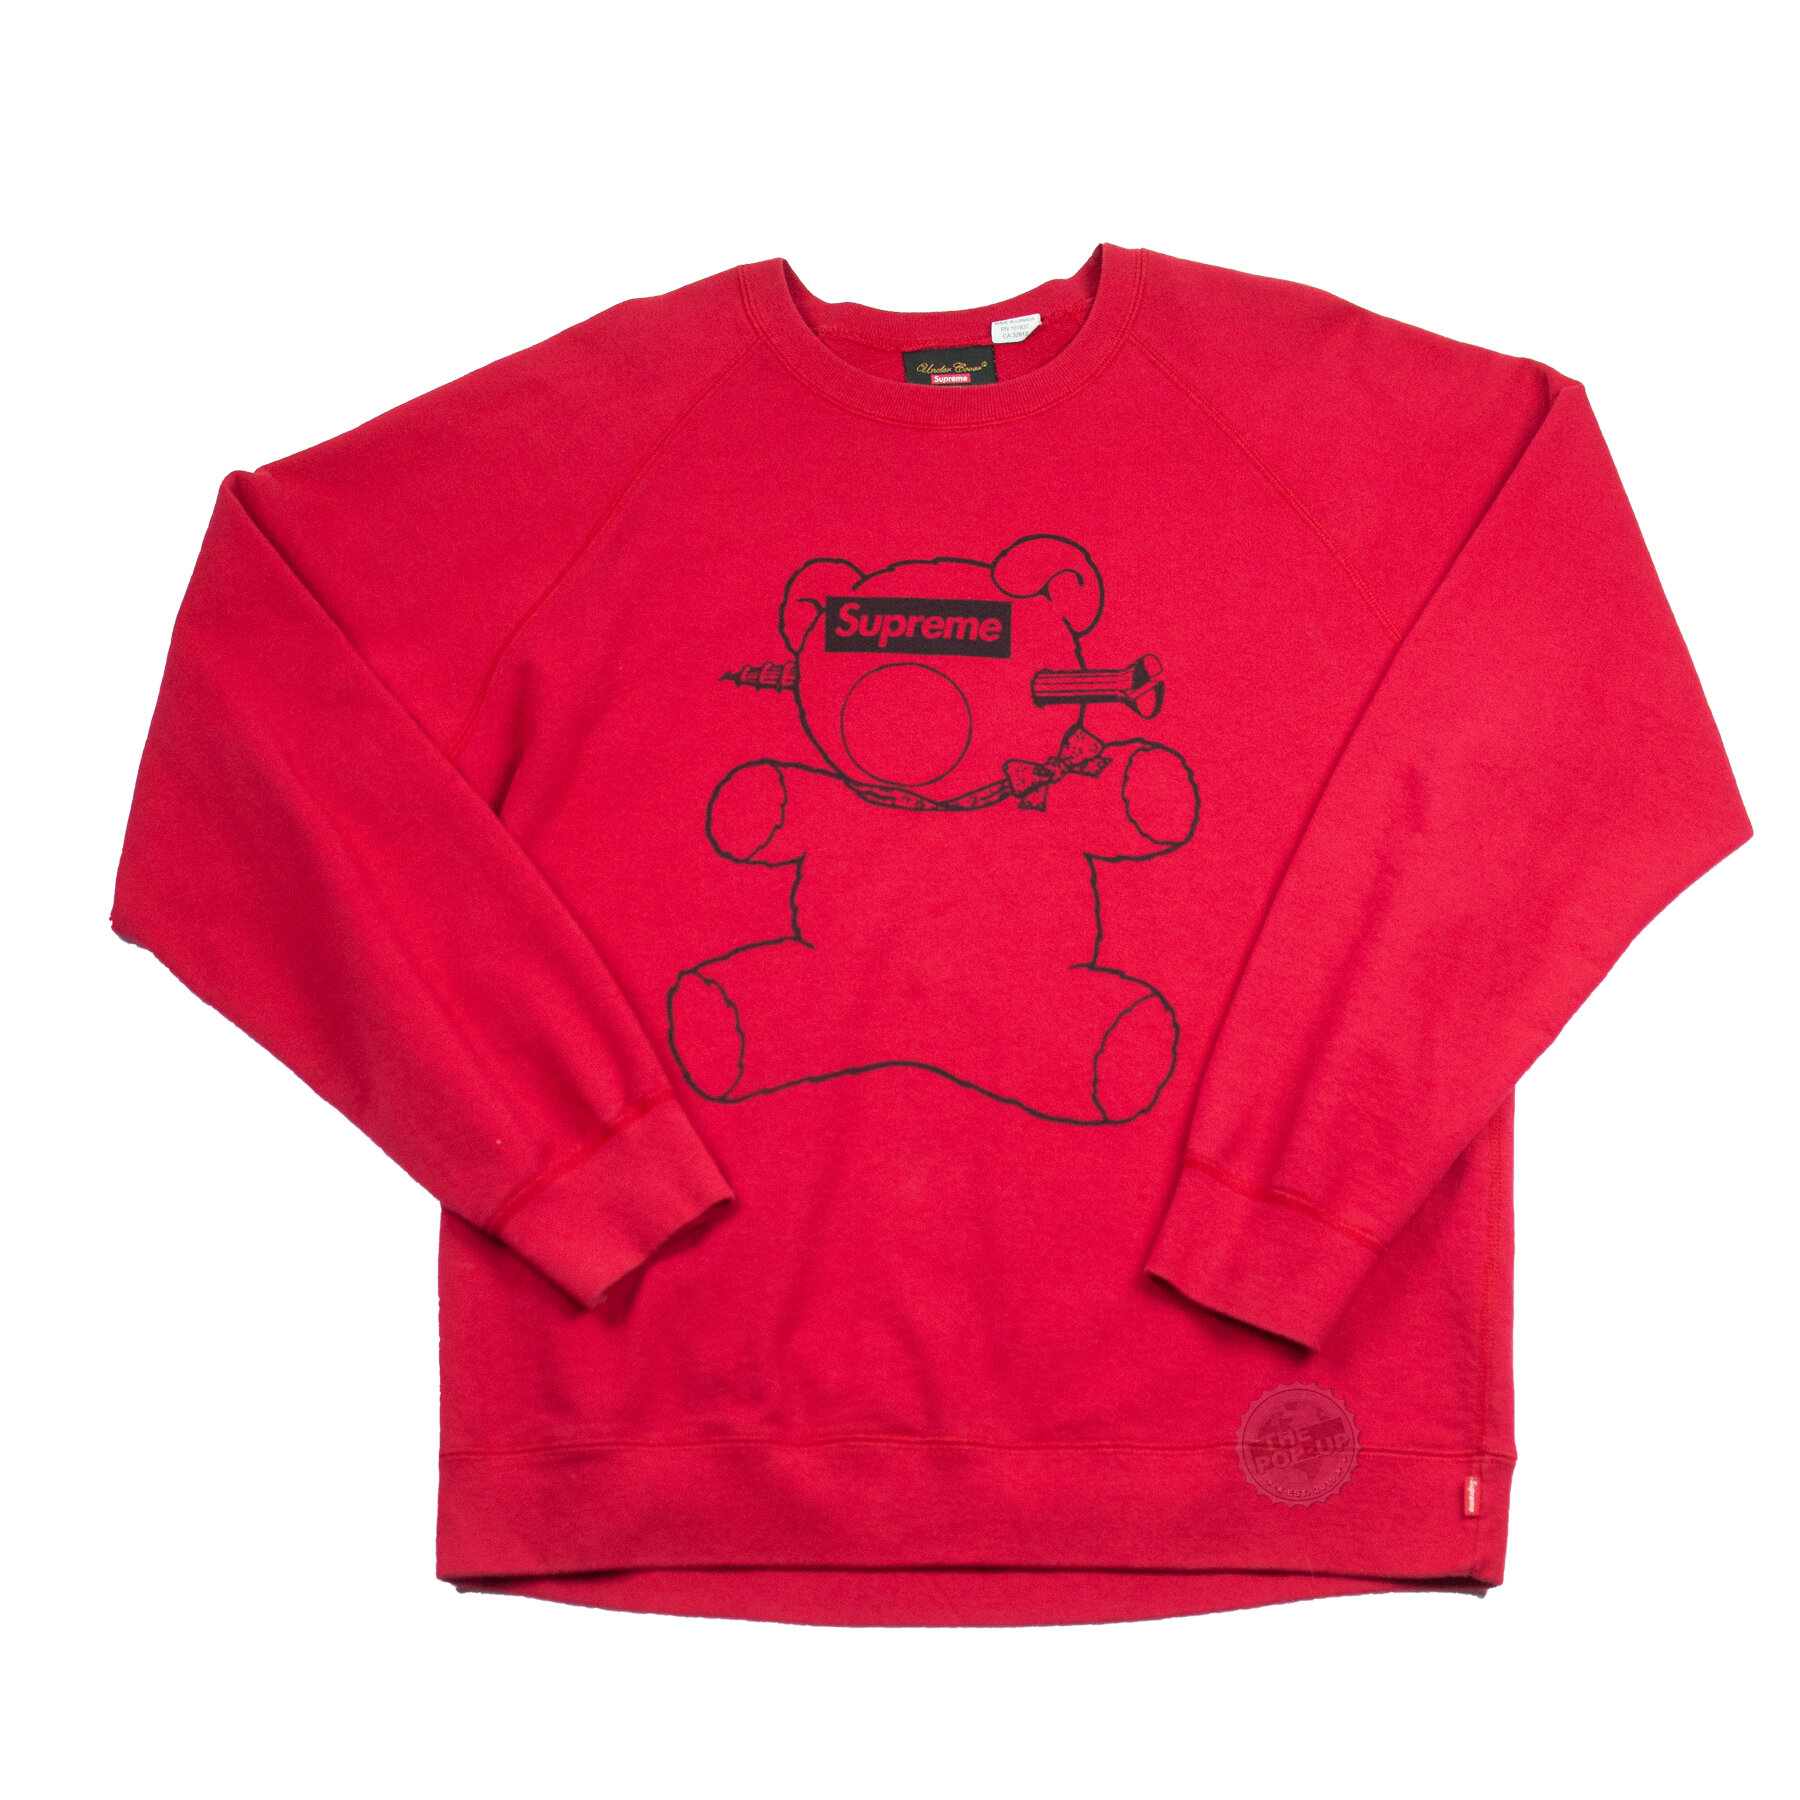 SS15 Supreme x Undercover Japan 'Bear' Crewneck Red (2015) — The Pop-Up📍